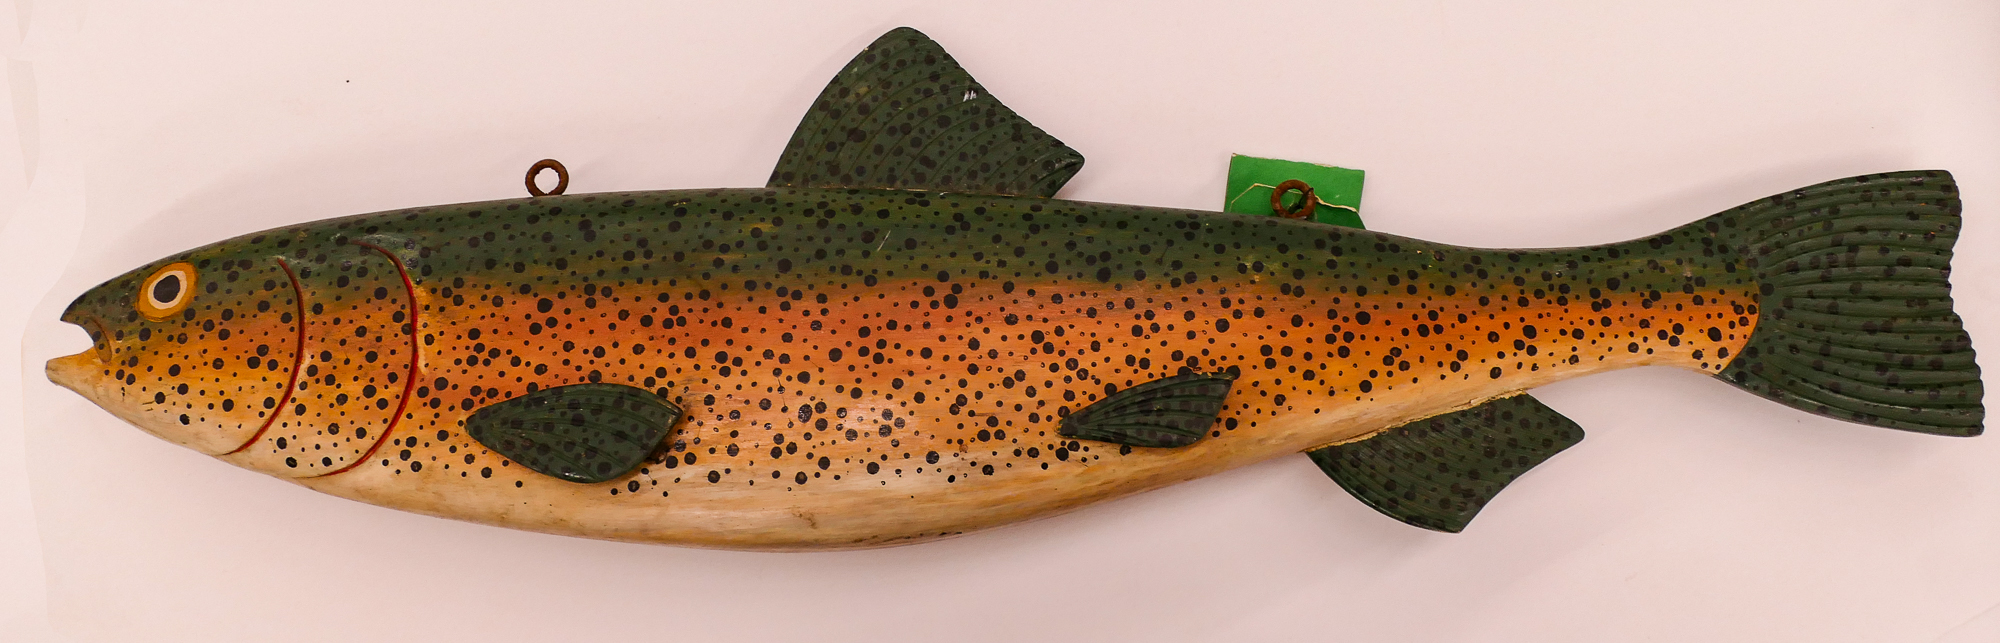 Trout Painted Wood Hanging Fish  3691ce